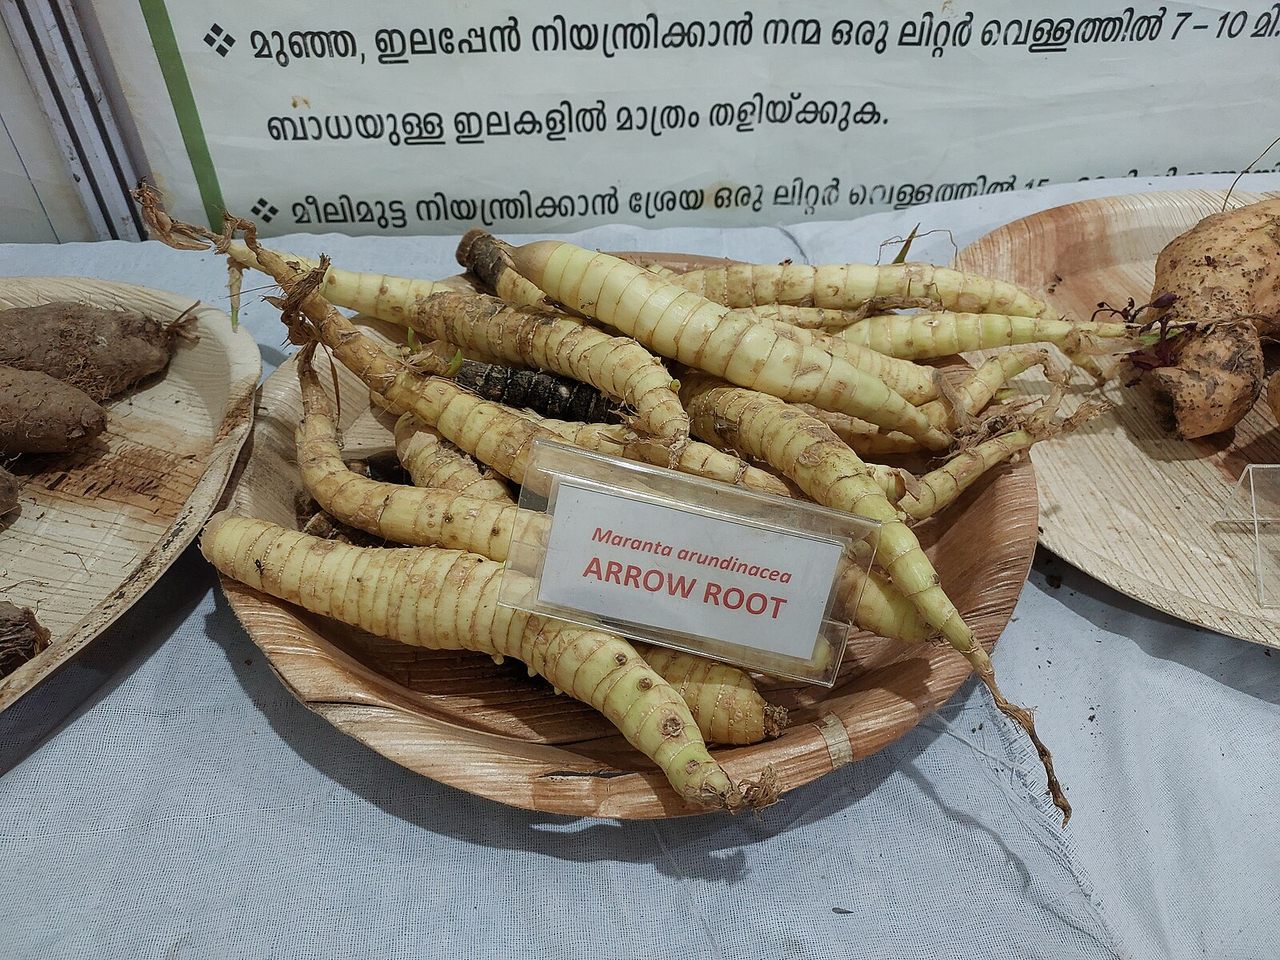 The Confusing Truth About Arrowroot - Gastro Obscura